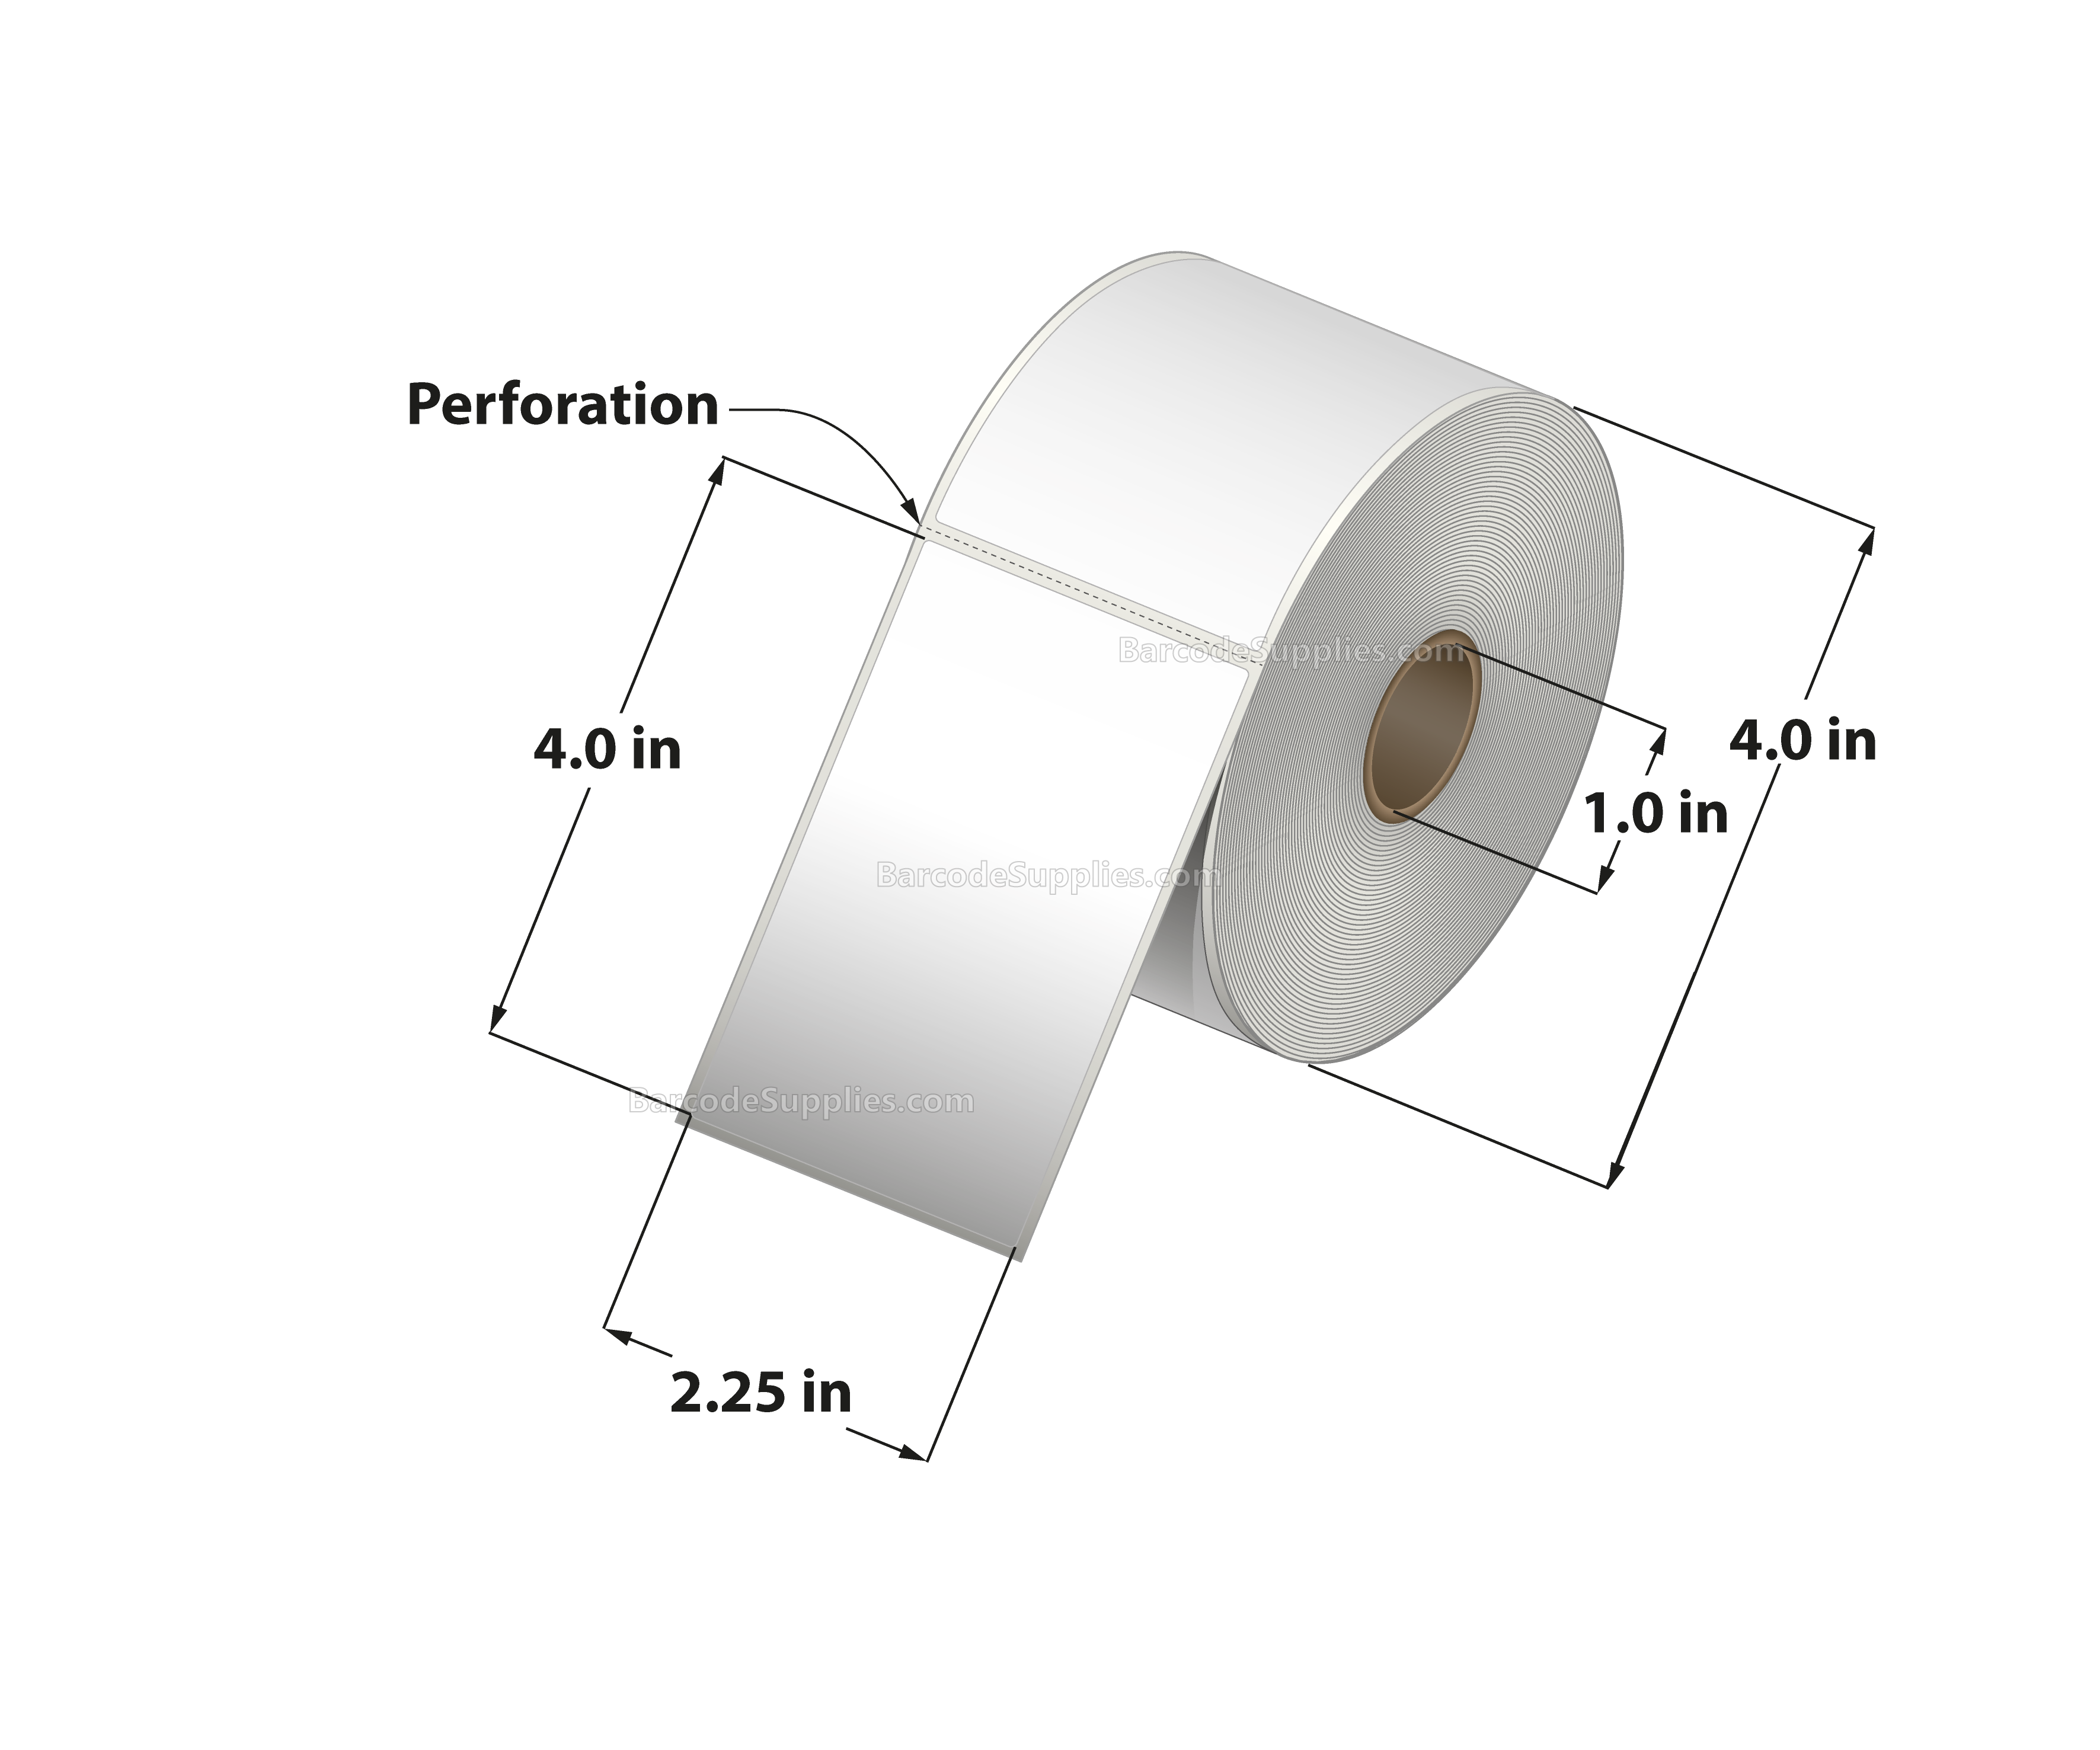 2.25 x 4 Direct Thermal White Labels With Acrylic Adhesive - Perforated - 440 Labels Per Roll - Carton Of 12 Rolls - 5280 Labels Total - MPN: RD-225-4-440-1 - BarcodeSource, Inc.